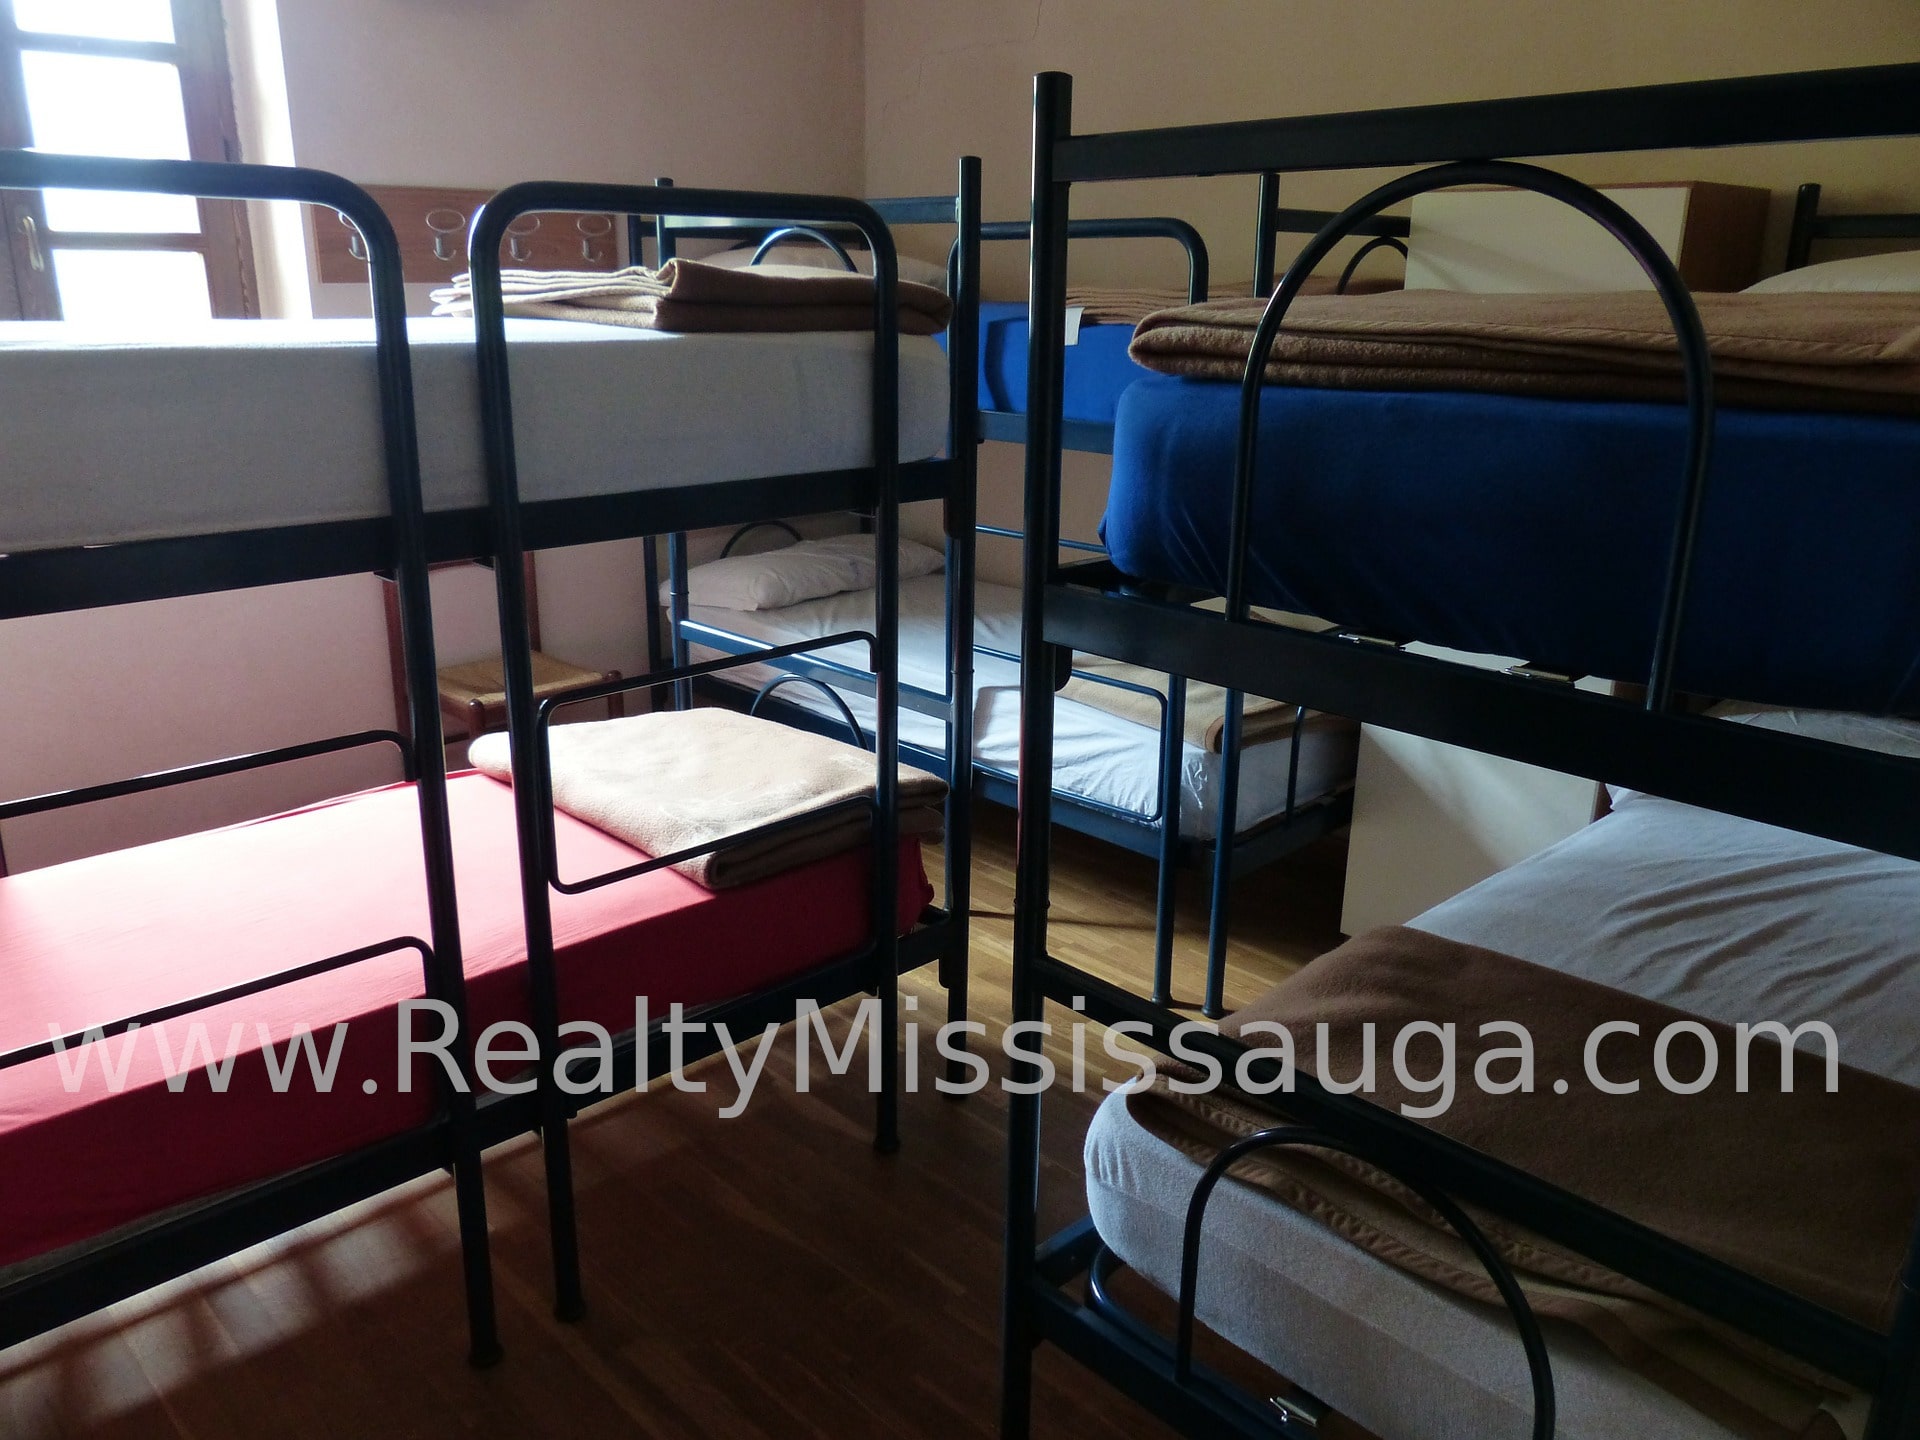 You are currently viewing Build and Rent Hostel Blocks in Mississauga